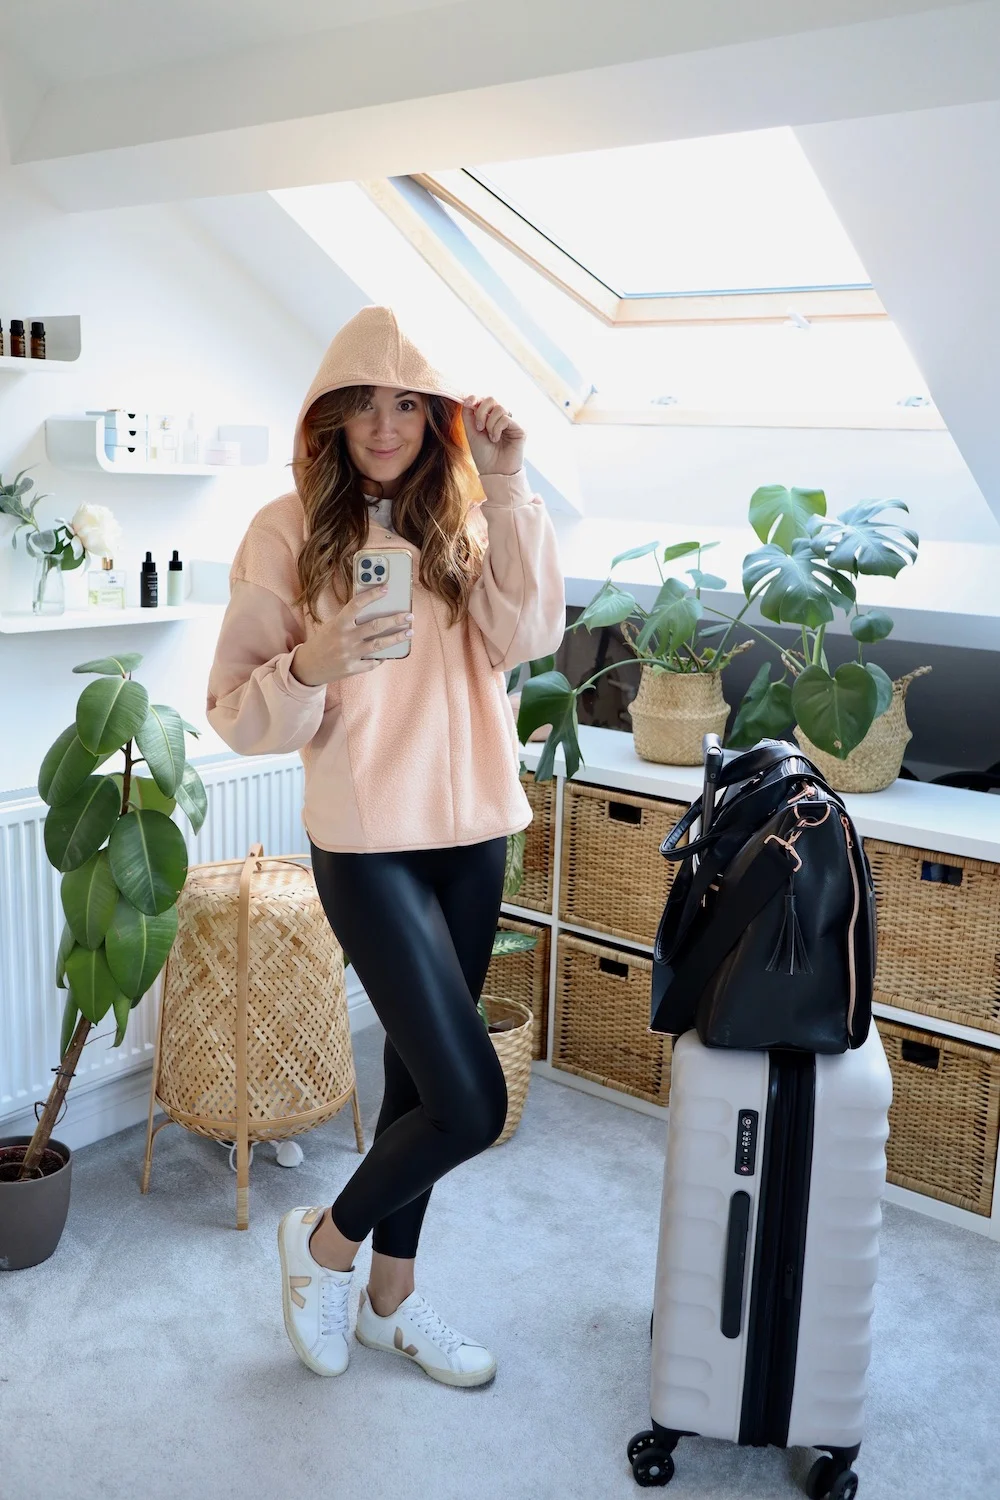 Best Airplane Outfit Ideas: 12 Chic (And Cozy!) Jetsetter Looks